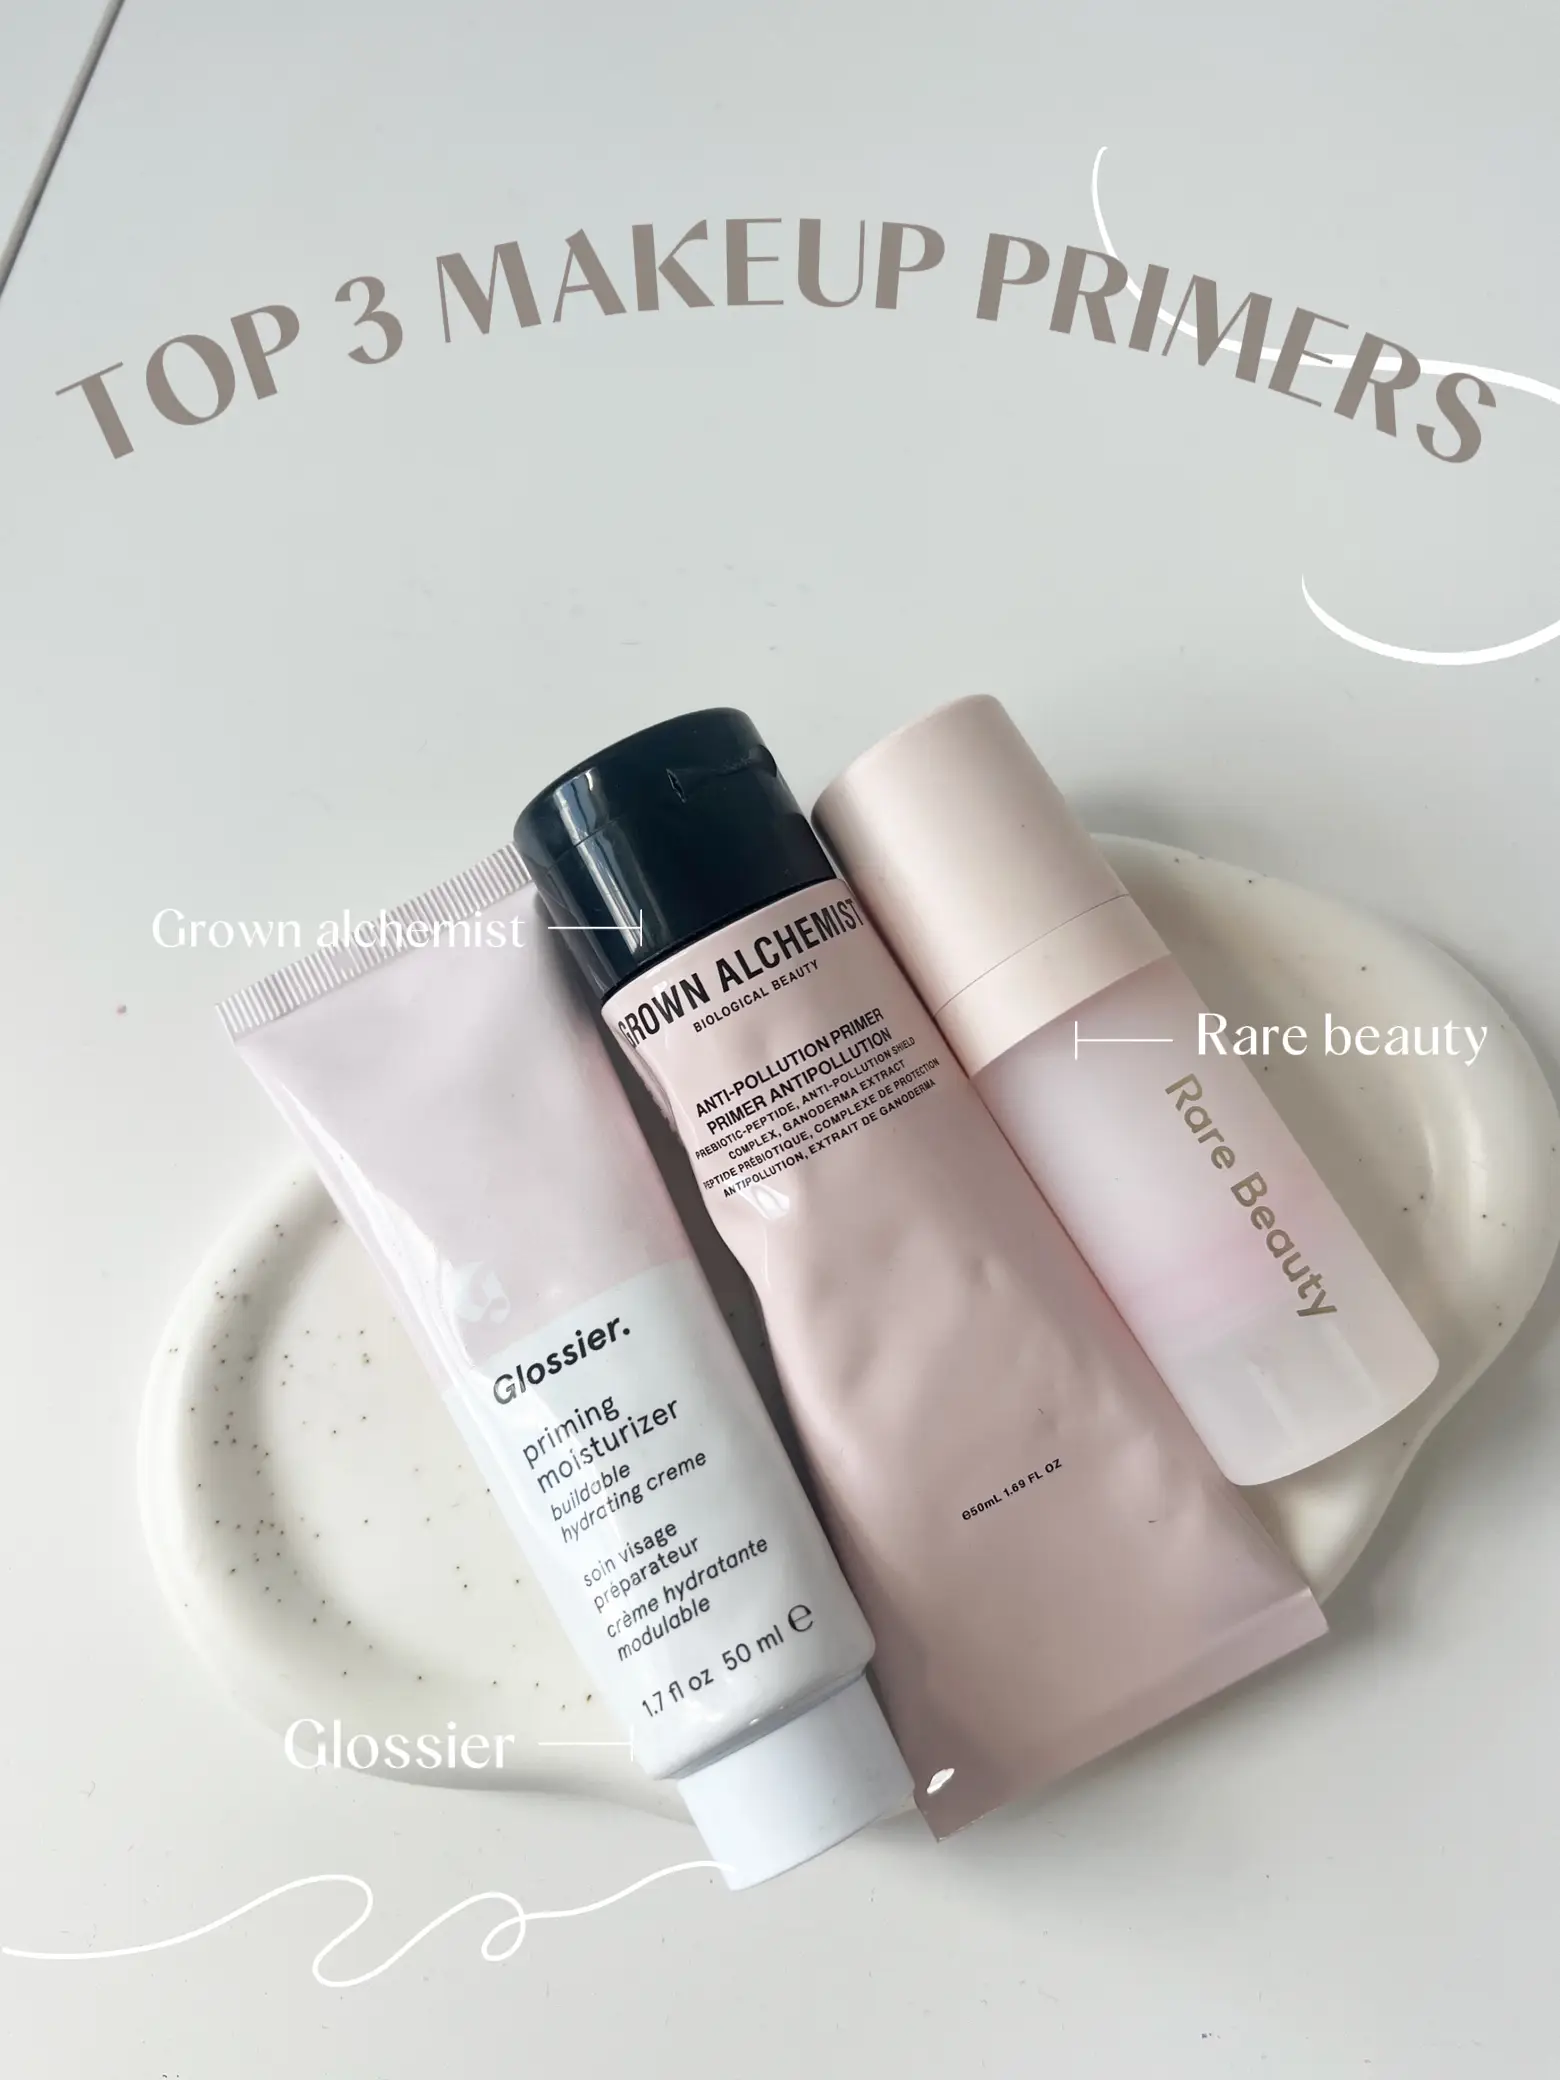 🌟 Makeup Primer Review: Top 3 Must-Haves! 🌟 | Gallery posted by Janet |  Lemon8